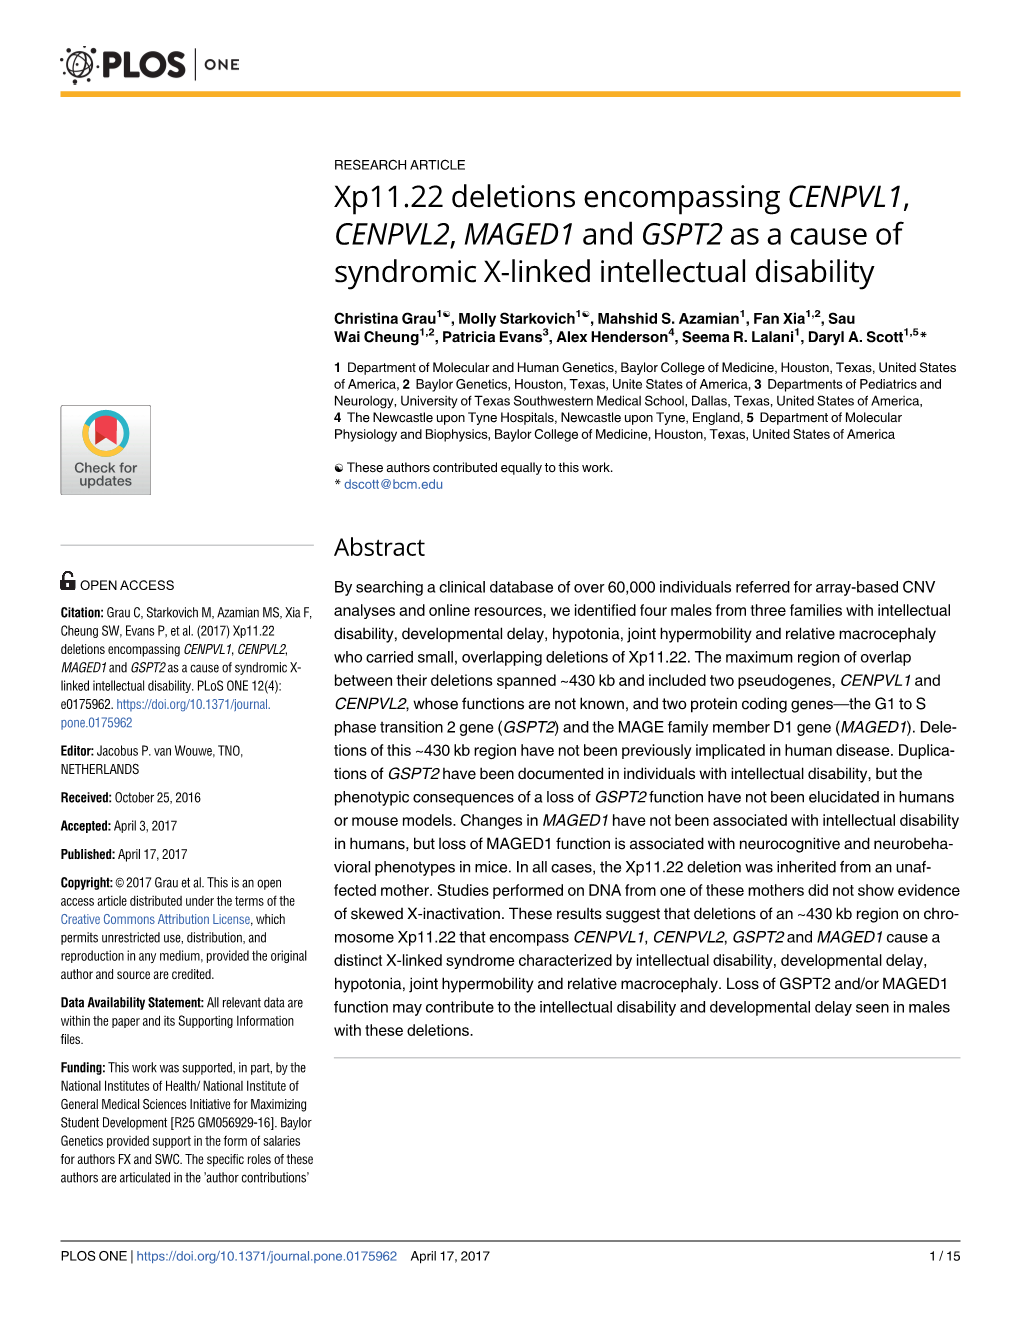 Xp11.22 Deletions Encompassing CENPVL1, CENPVL2, MAGED1 and GSPT2 As a Cause of Syndromic X-Linked Intellectual Disability